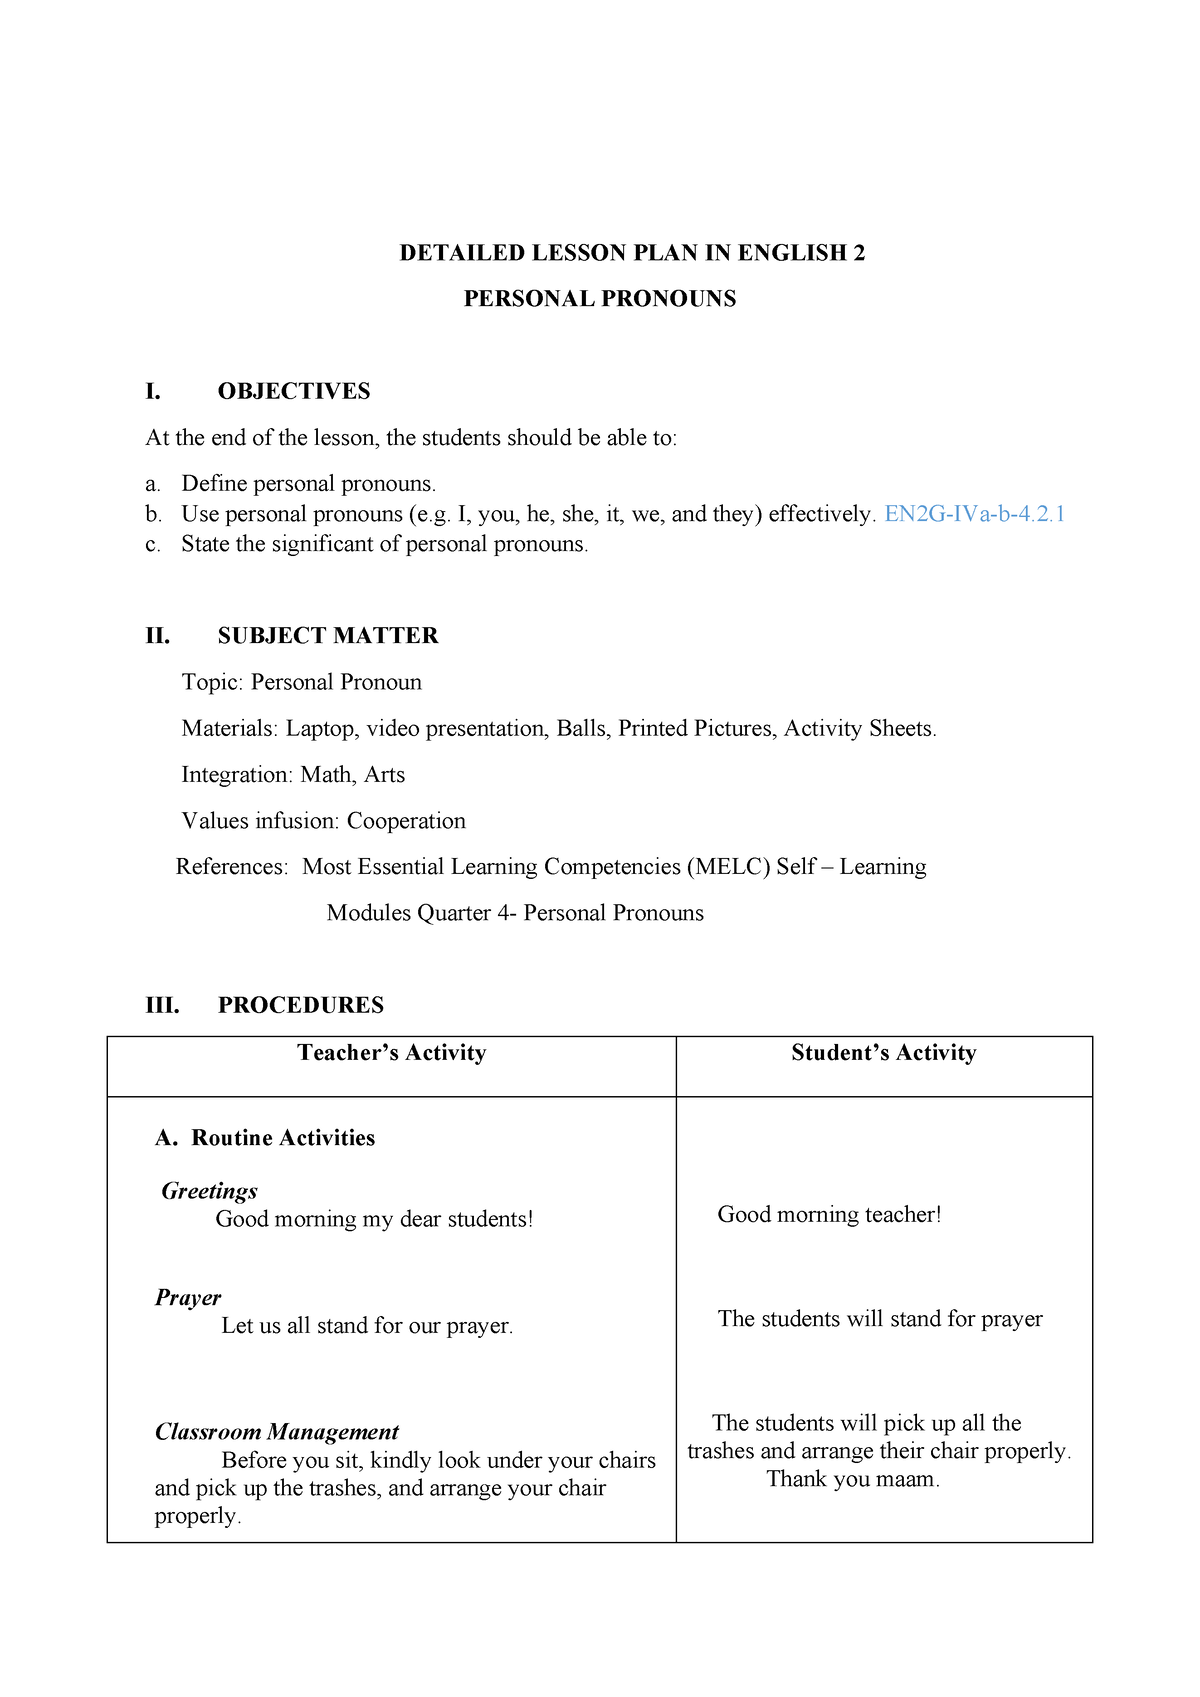 Detailed lesson plan in english 2 personal pronouns i objectives Compress DETAILED LESSON PLAN 